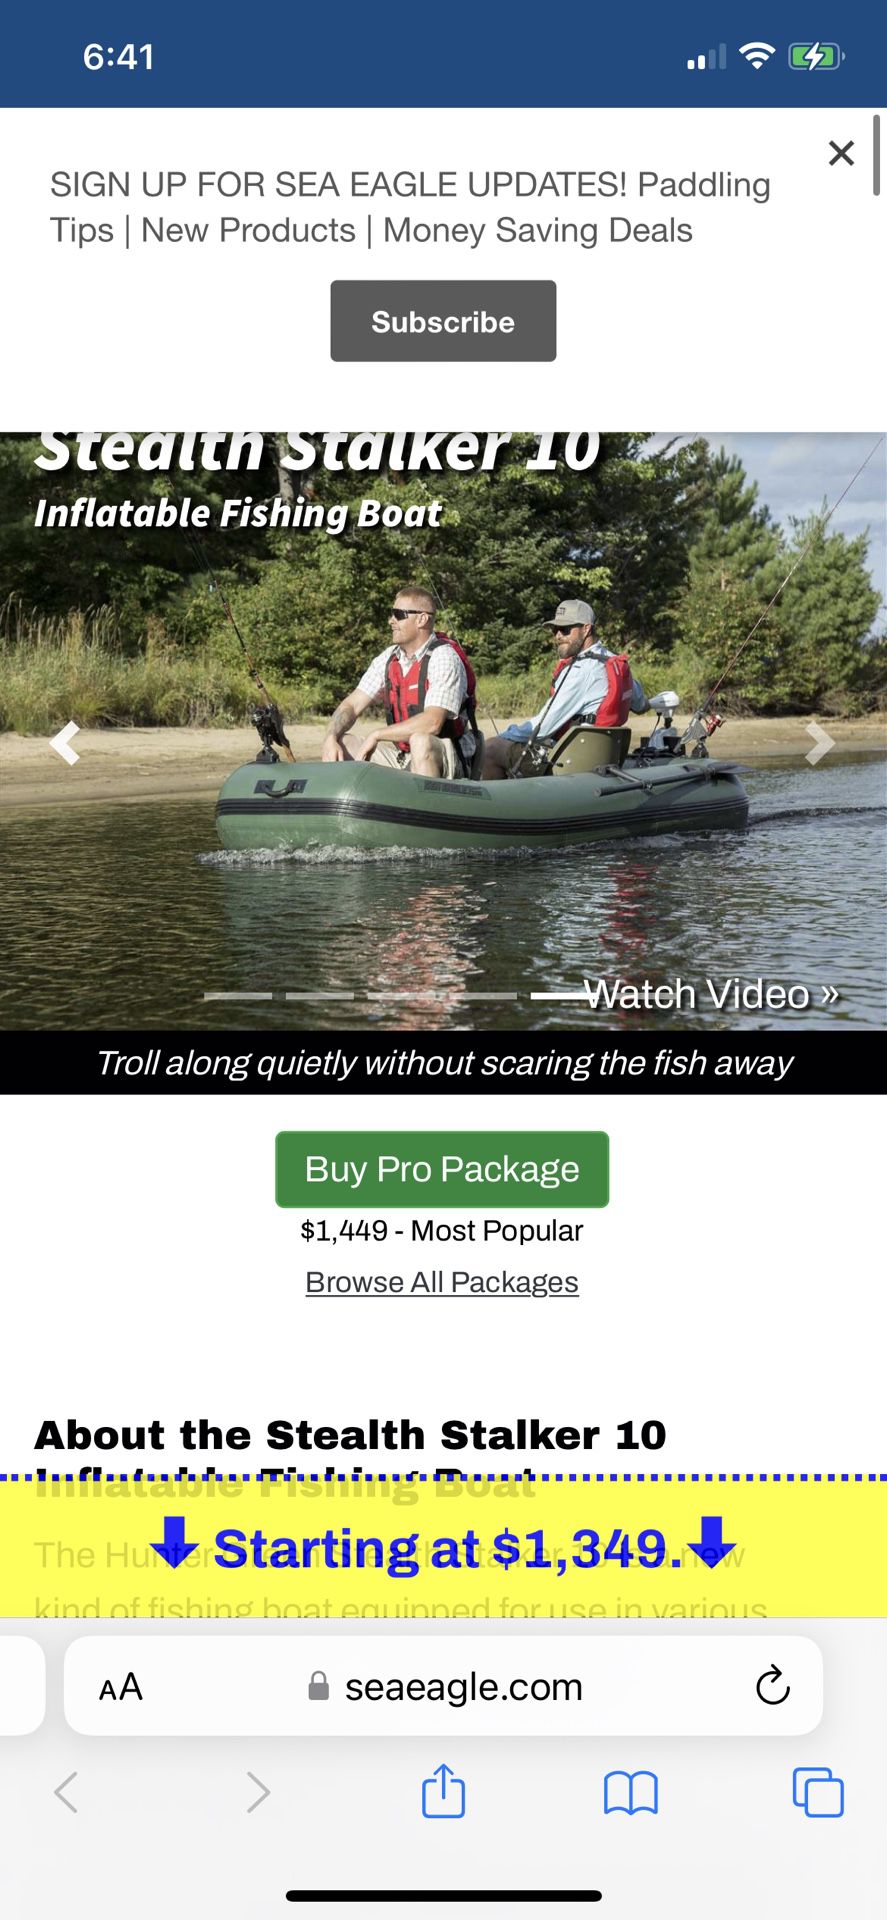 Inflatable Fishing Boat Stealth Stalker Sea https://offerup.com/redirect/?o=RWFnbGUuY29t